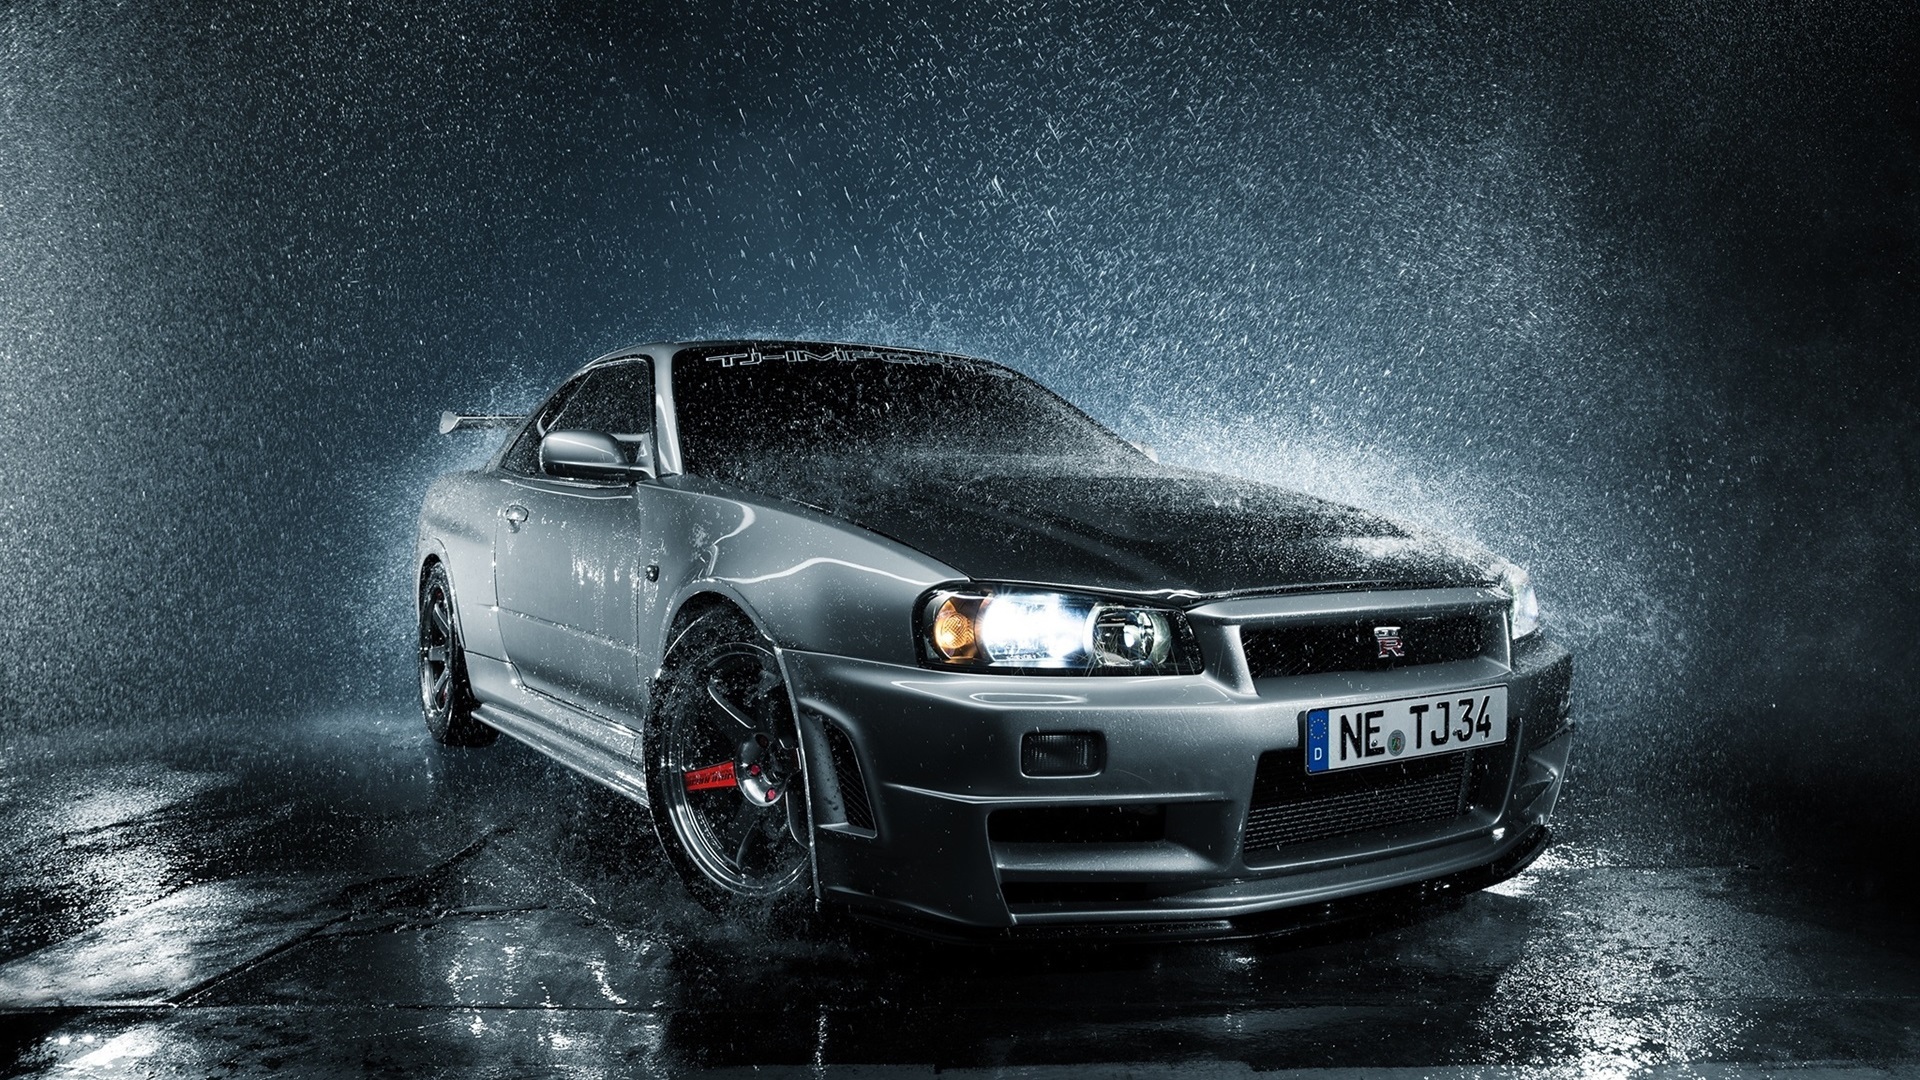 General 1920x1080 water drops car lights vehicle water numbers silver cars Nissan Nissan Skyline R34 Japanese cars Nissan Skyline